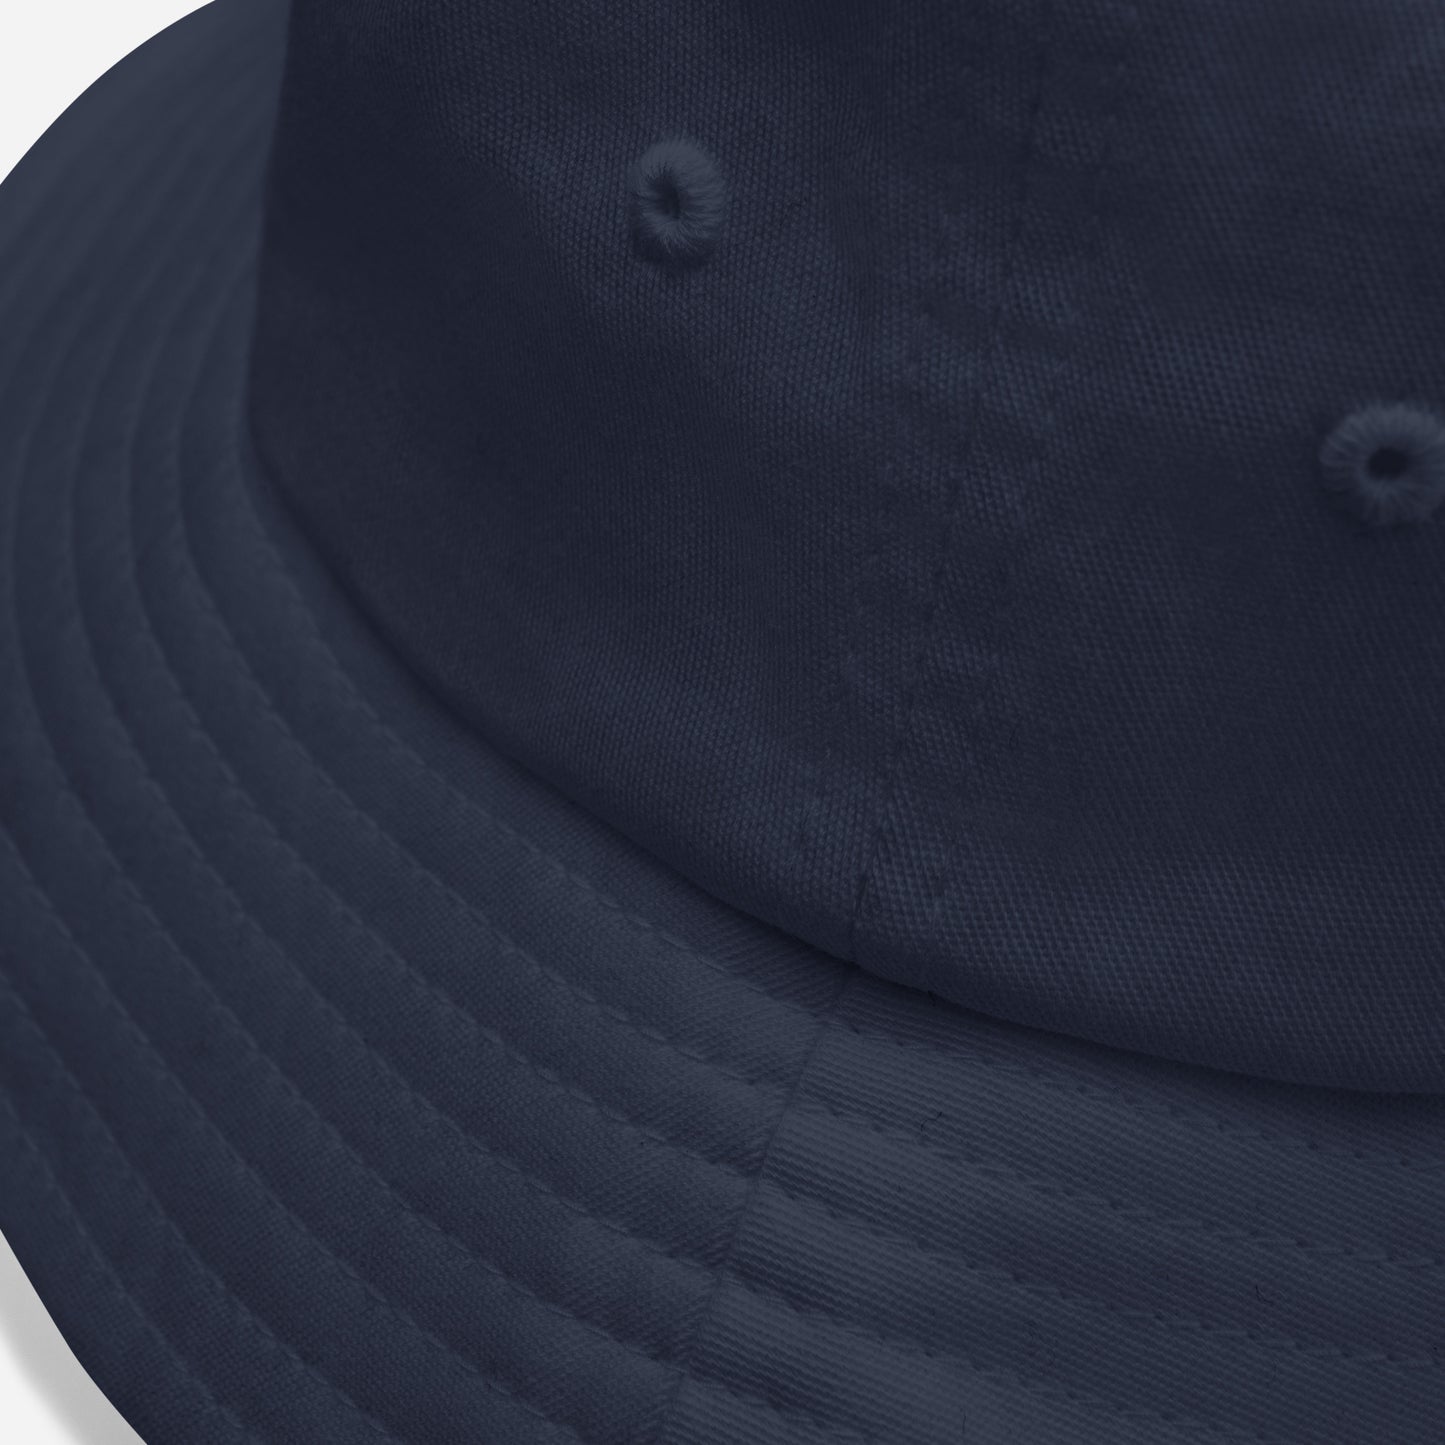 detail of bob bucket hat navy b.dfrnt by b.different clothing independent streetwear inspired by street art graffiti